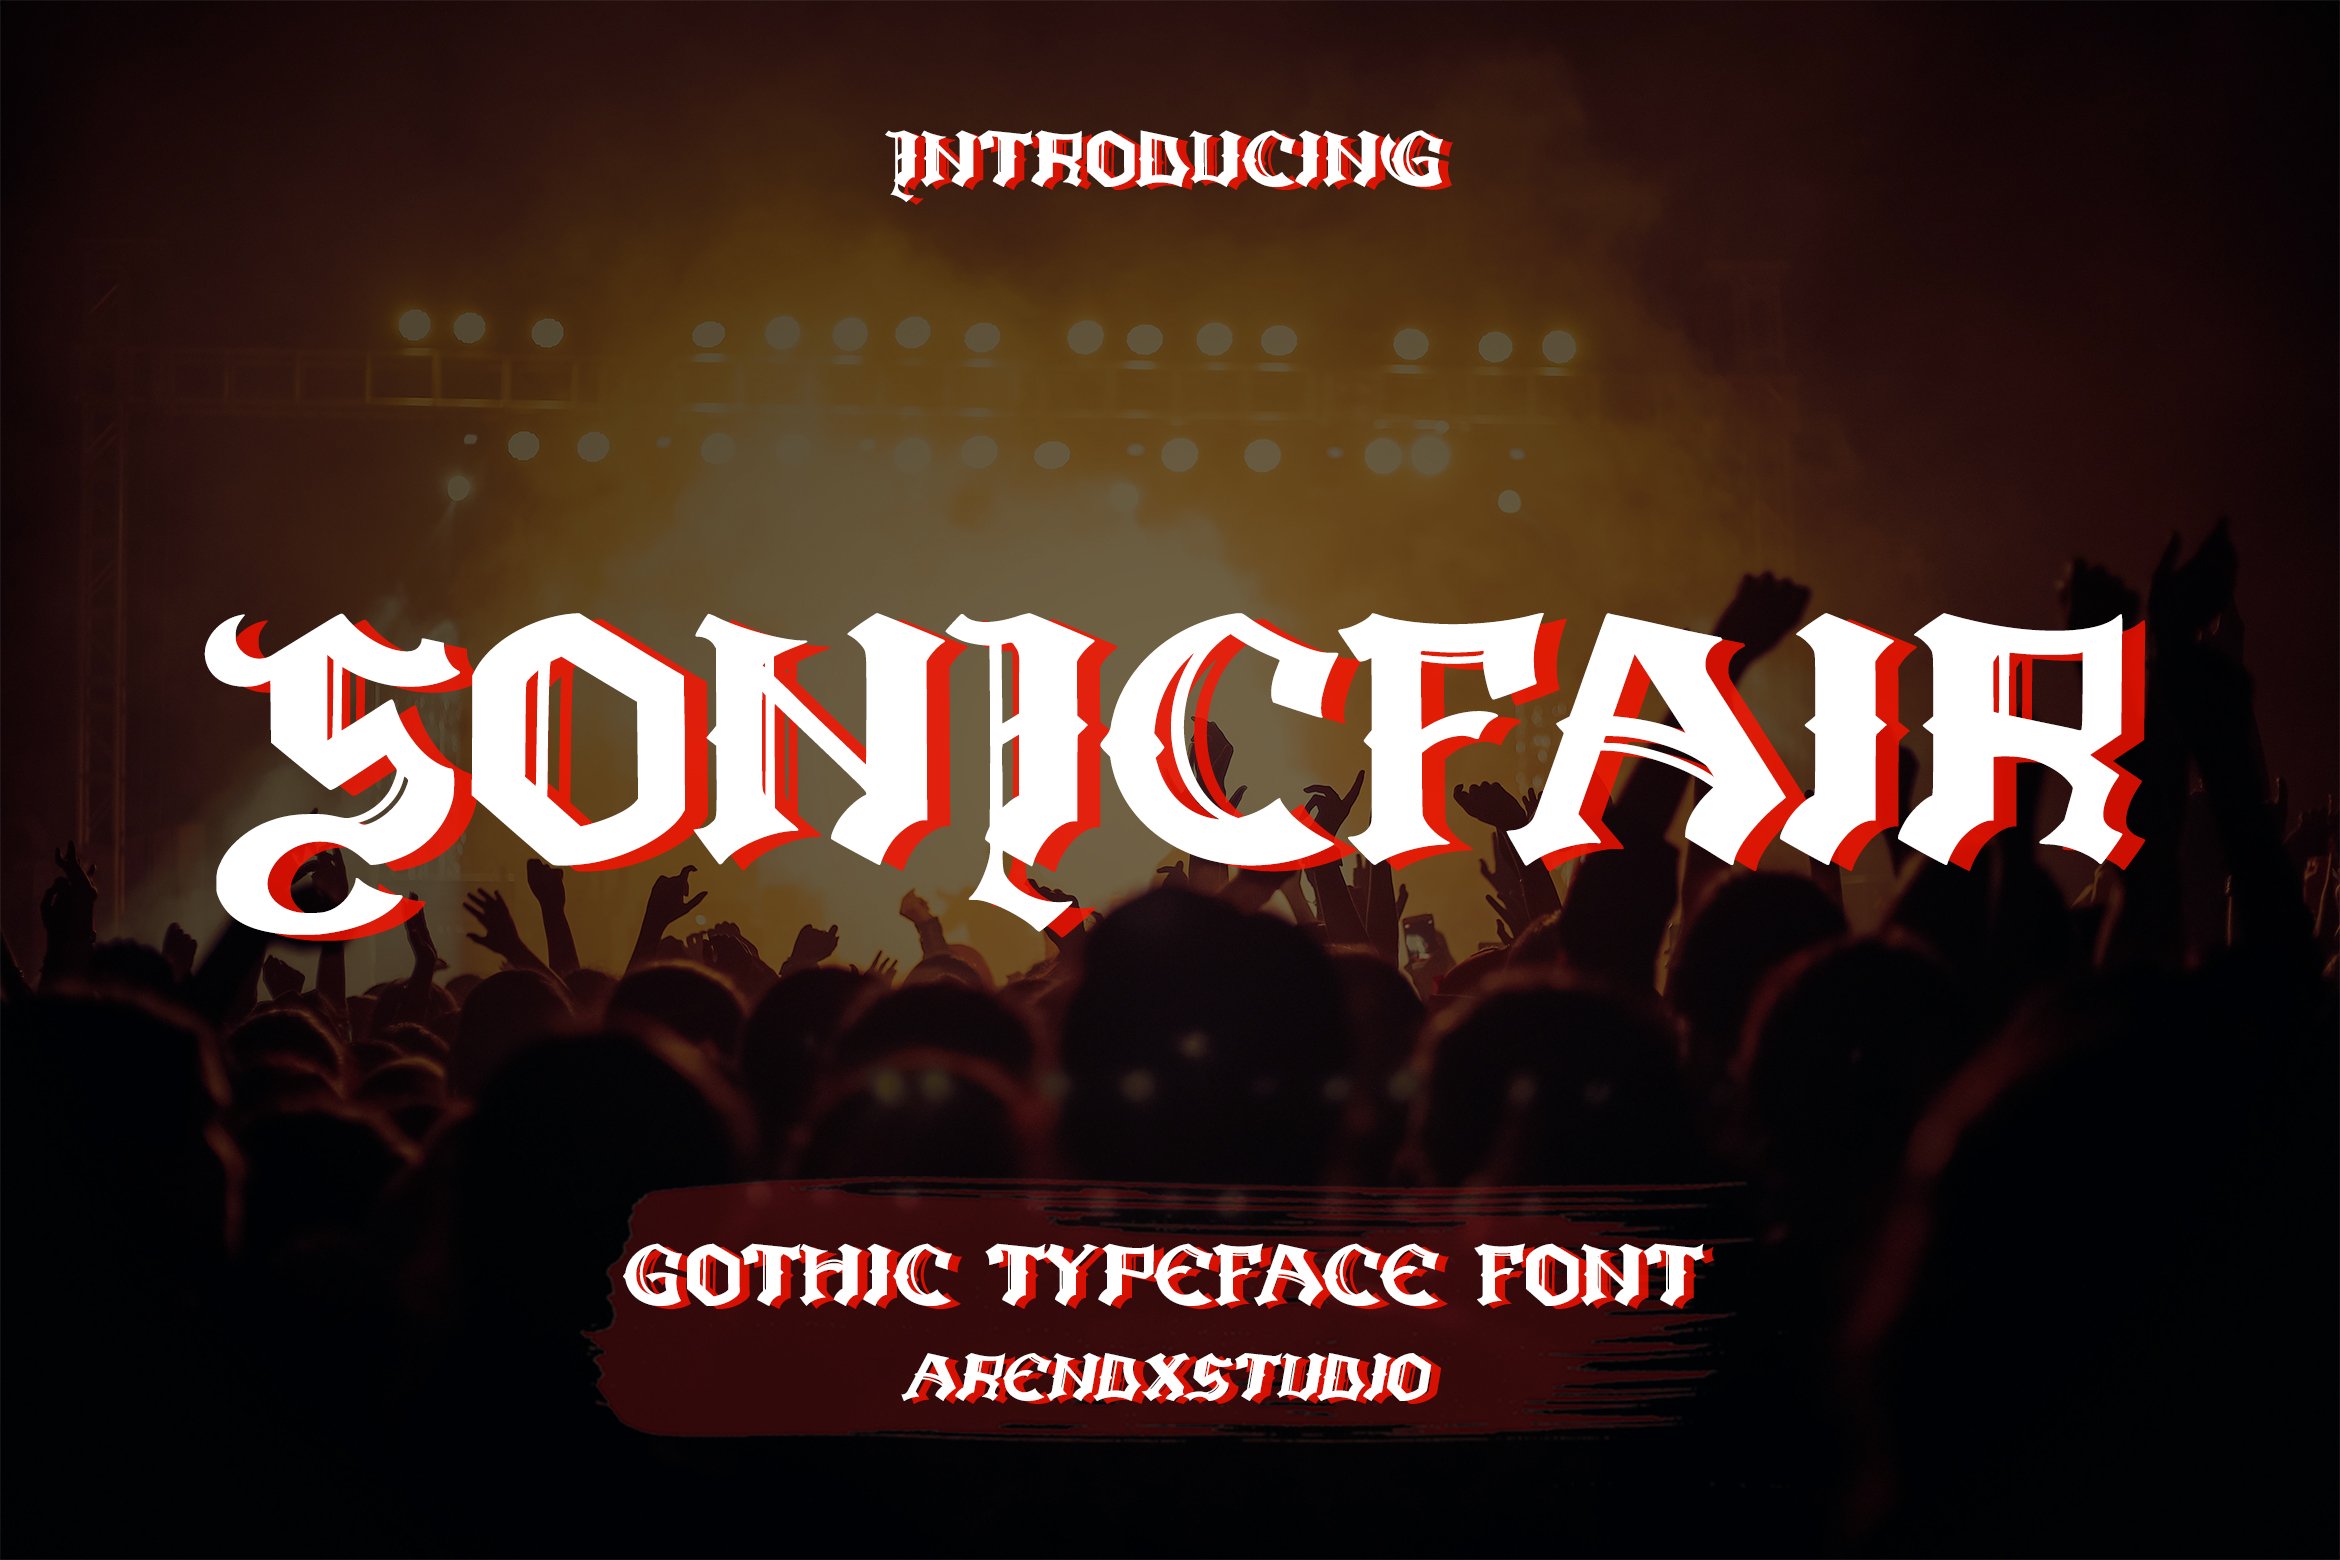 Sonicfair - Gothic Typeface Font cover image.